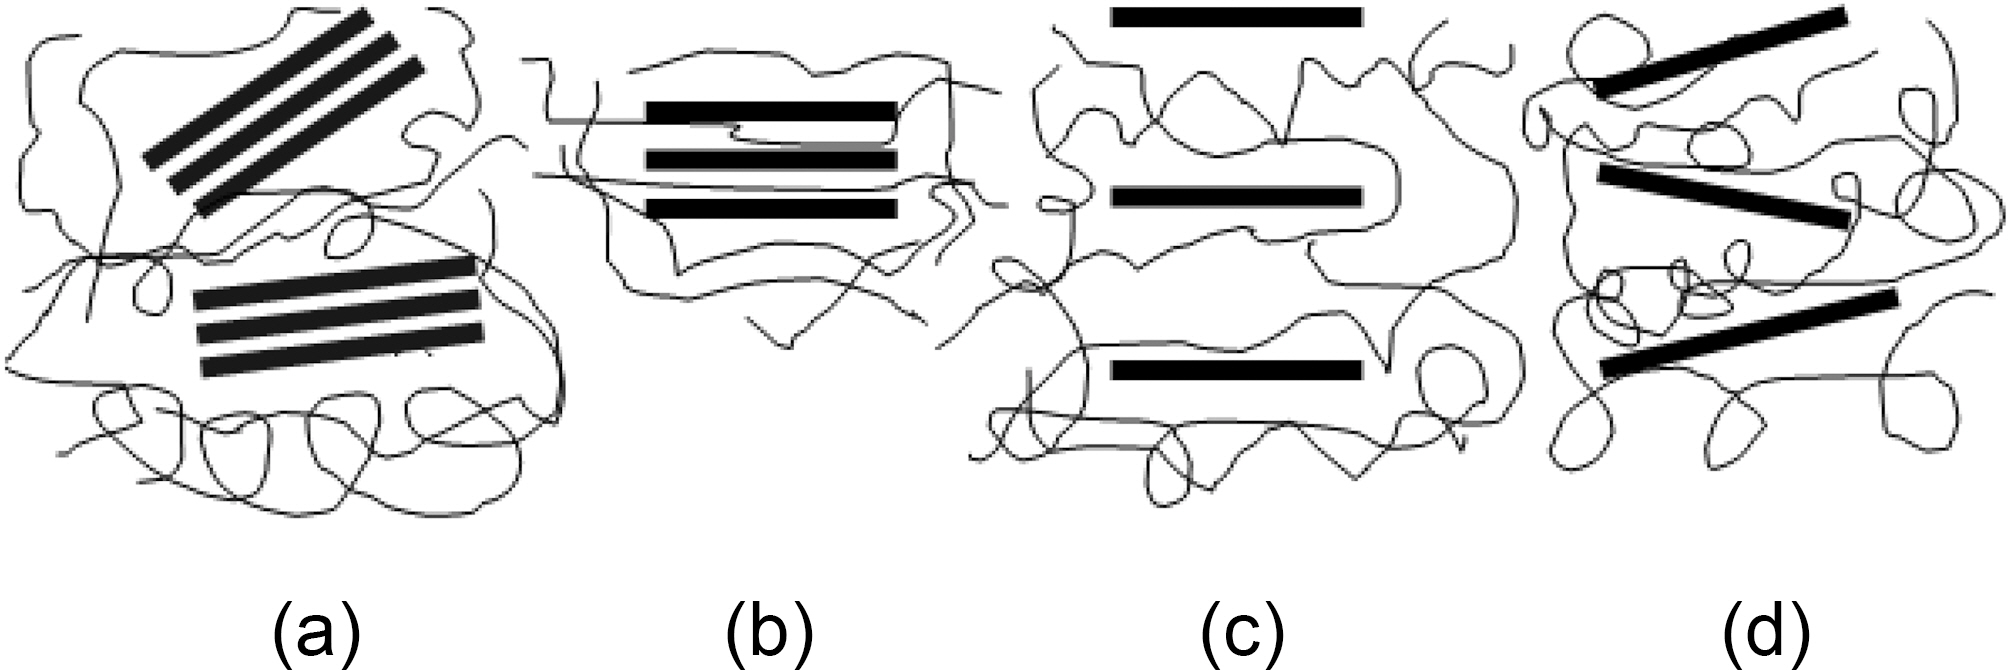 Schematic diagram of nanocomposites: (a) conventional (b) intercalated (c) long range and (d) disordered.